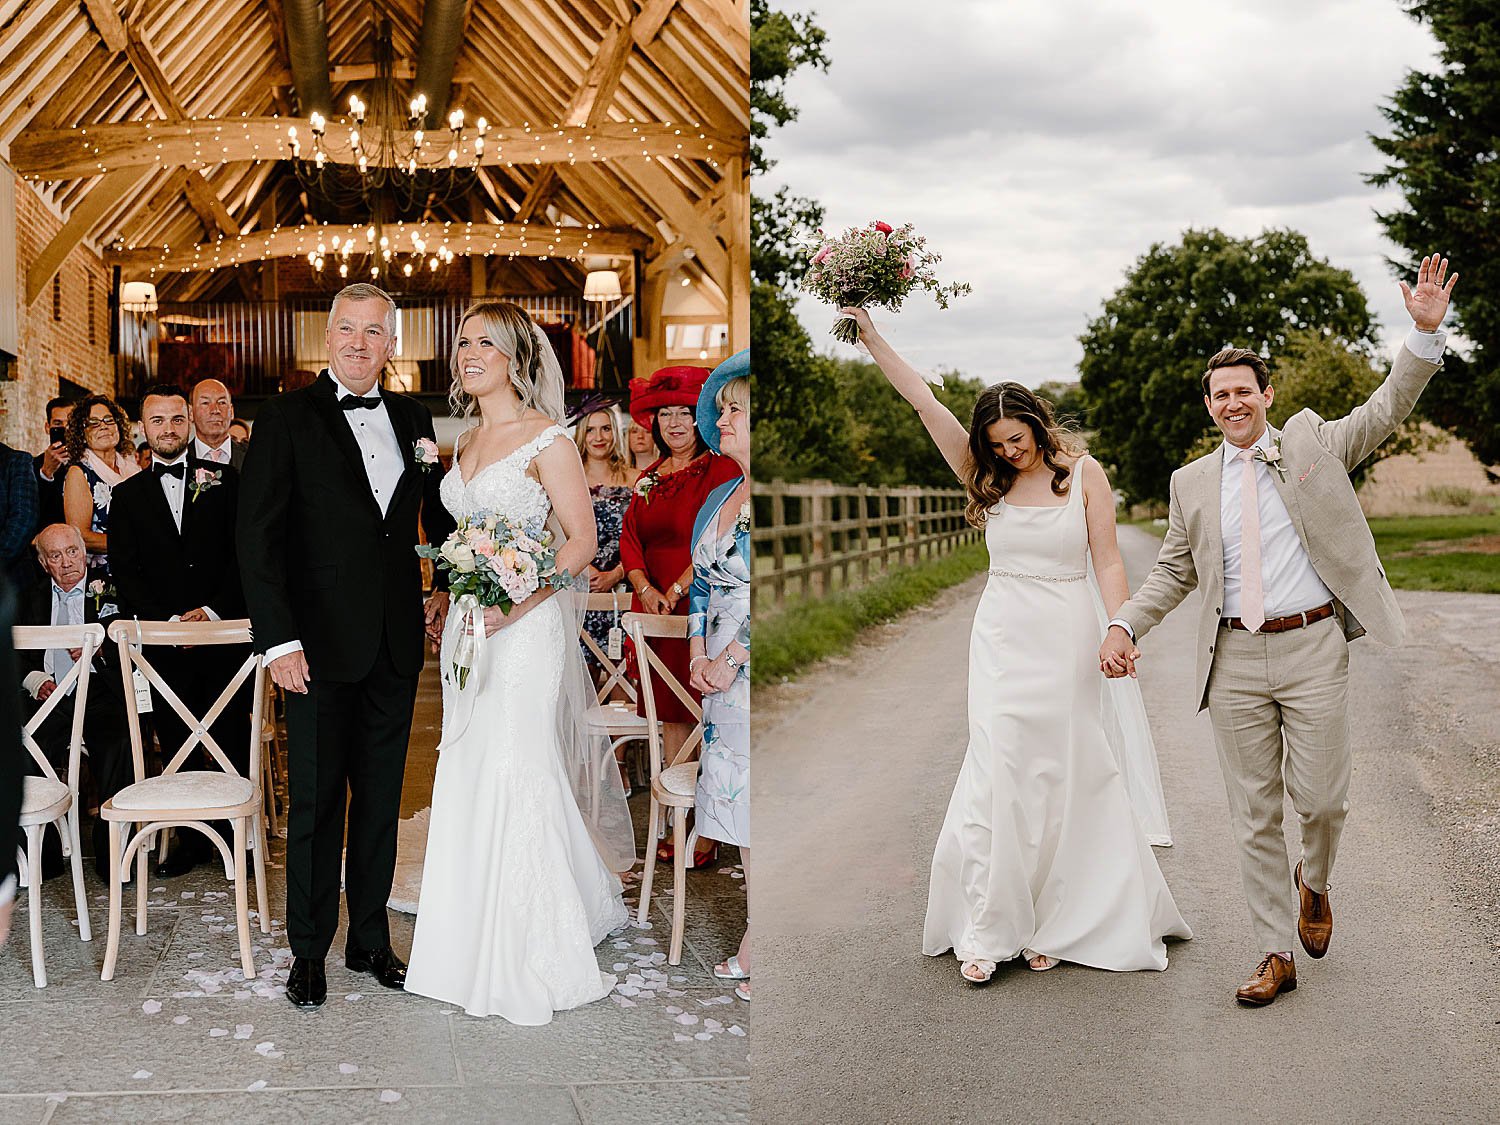 Oxfordshire and the cotswolds wedding photographer 2022 review174.jpg